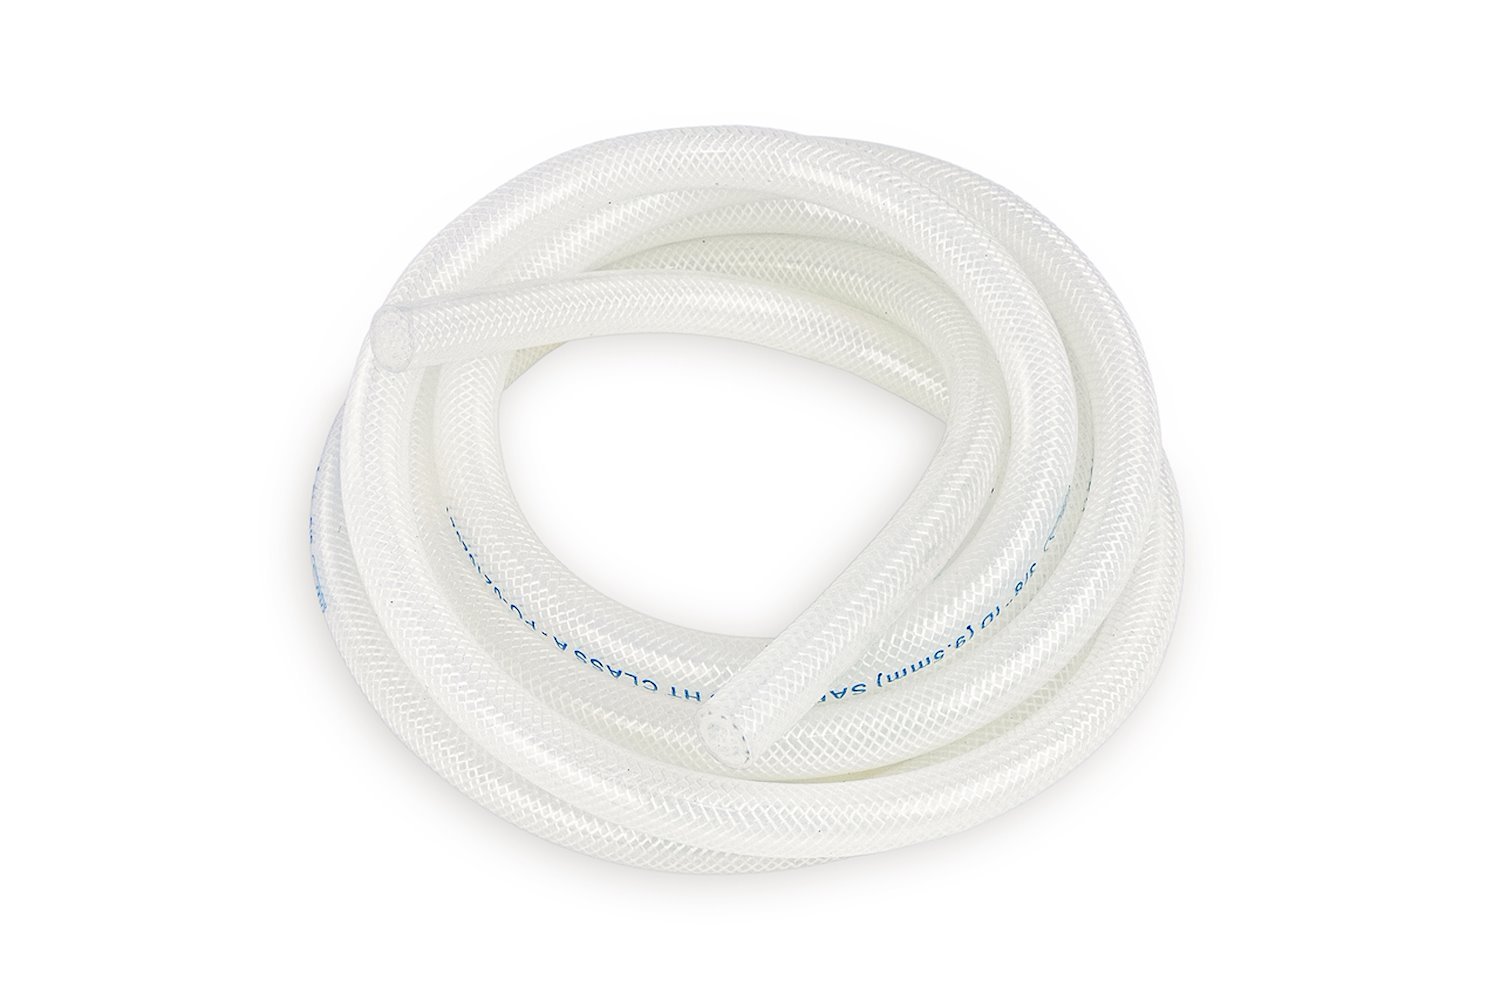 HTHH-062-CLEARx10 Silicone Heater Hose Tubing, High-Temp Reinforced, 5/8 in. ID, 10 ft. Roll, Clear